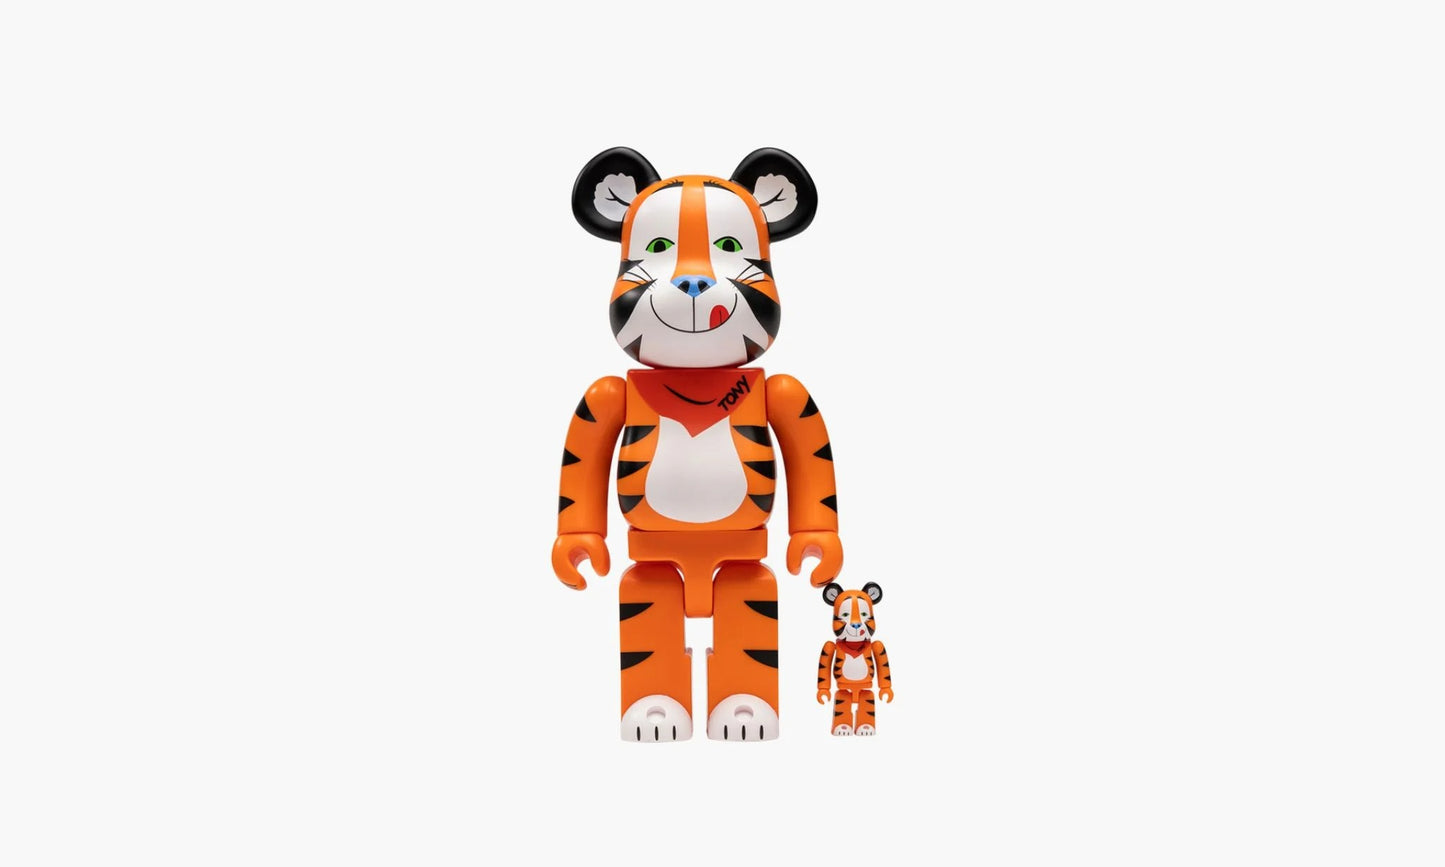 Bearbrick Tony The Tiger 100% and 400% | The Sortage